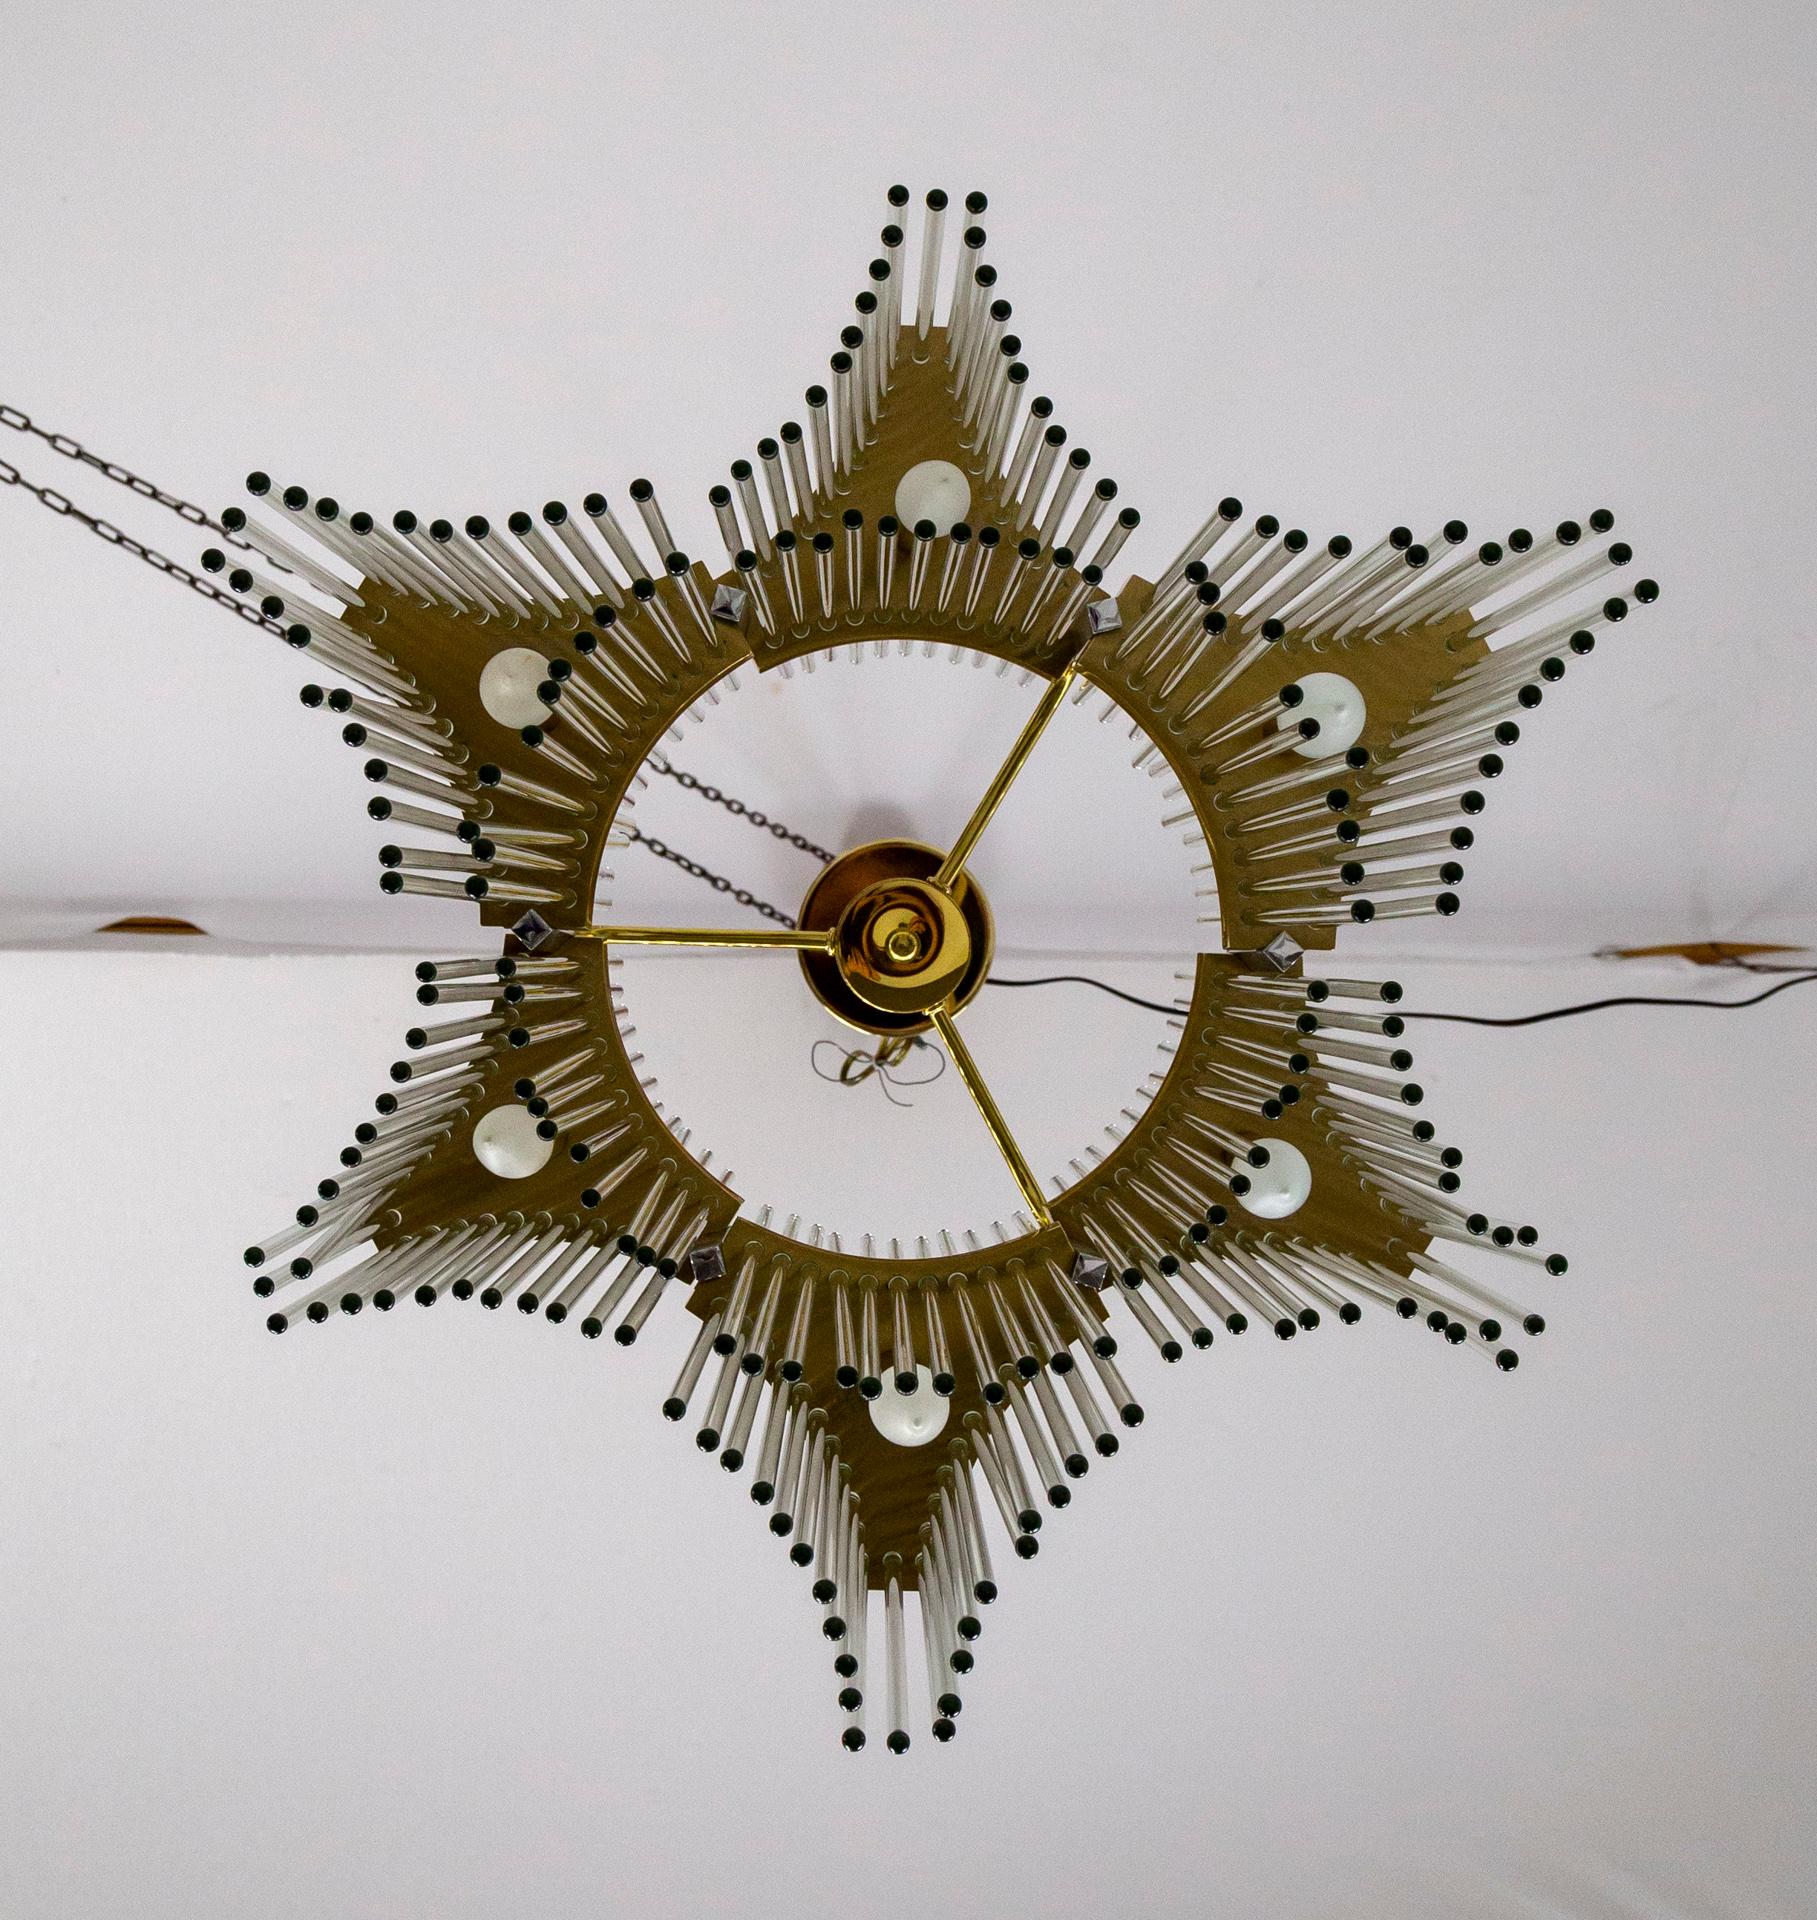 An iconic, Gaetano Sciolari, glass rod chandelier from the 1970s. Six groups of hanging rods in alternating heights, with 2 sockets each (one bulb pointing up, the other down), banded with brass. It forms a star shape when seen from below based on